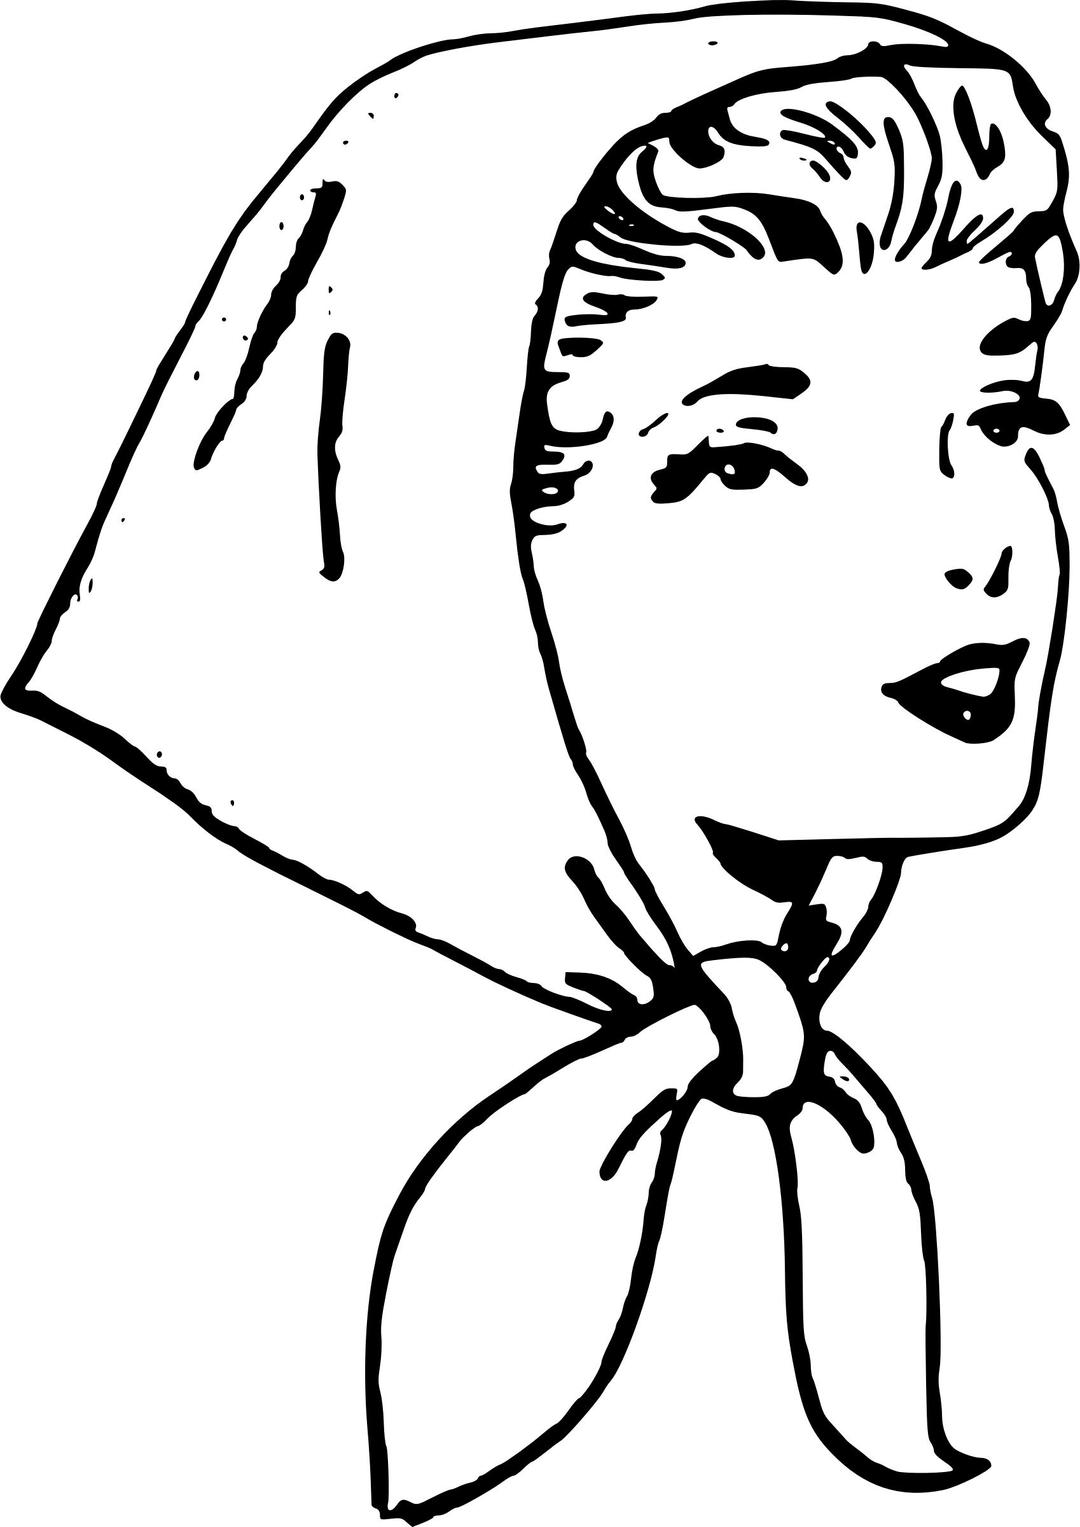 Lady in Headscarf png transparent